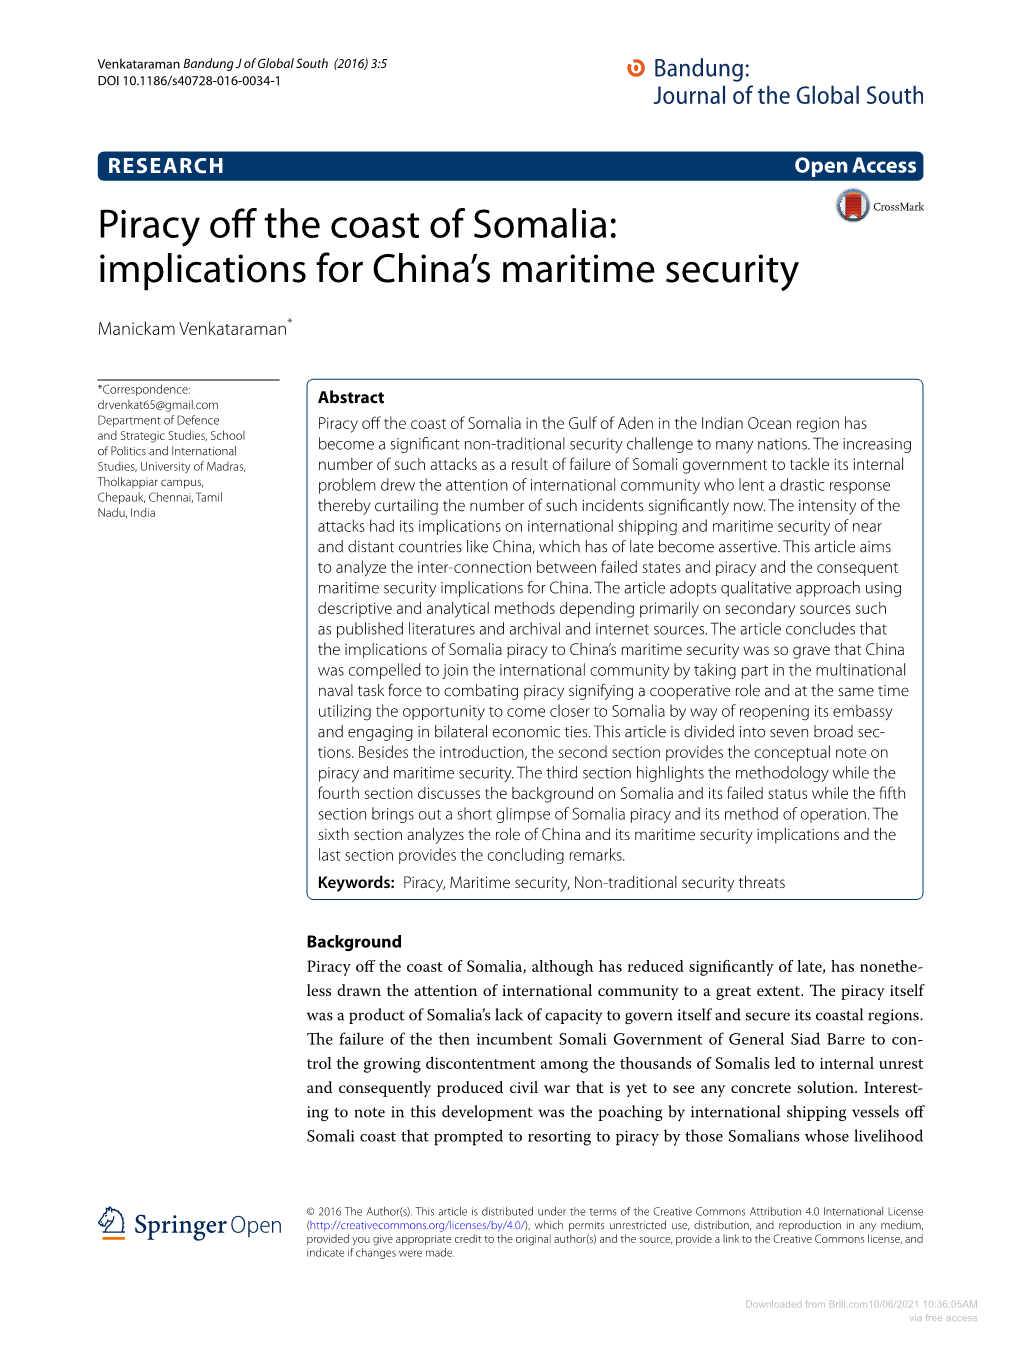 Piracy Off the Coast of Somalia: Implications for China's Maritime